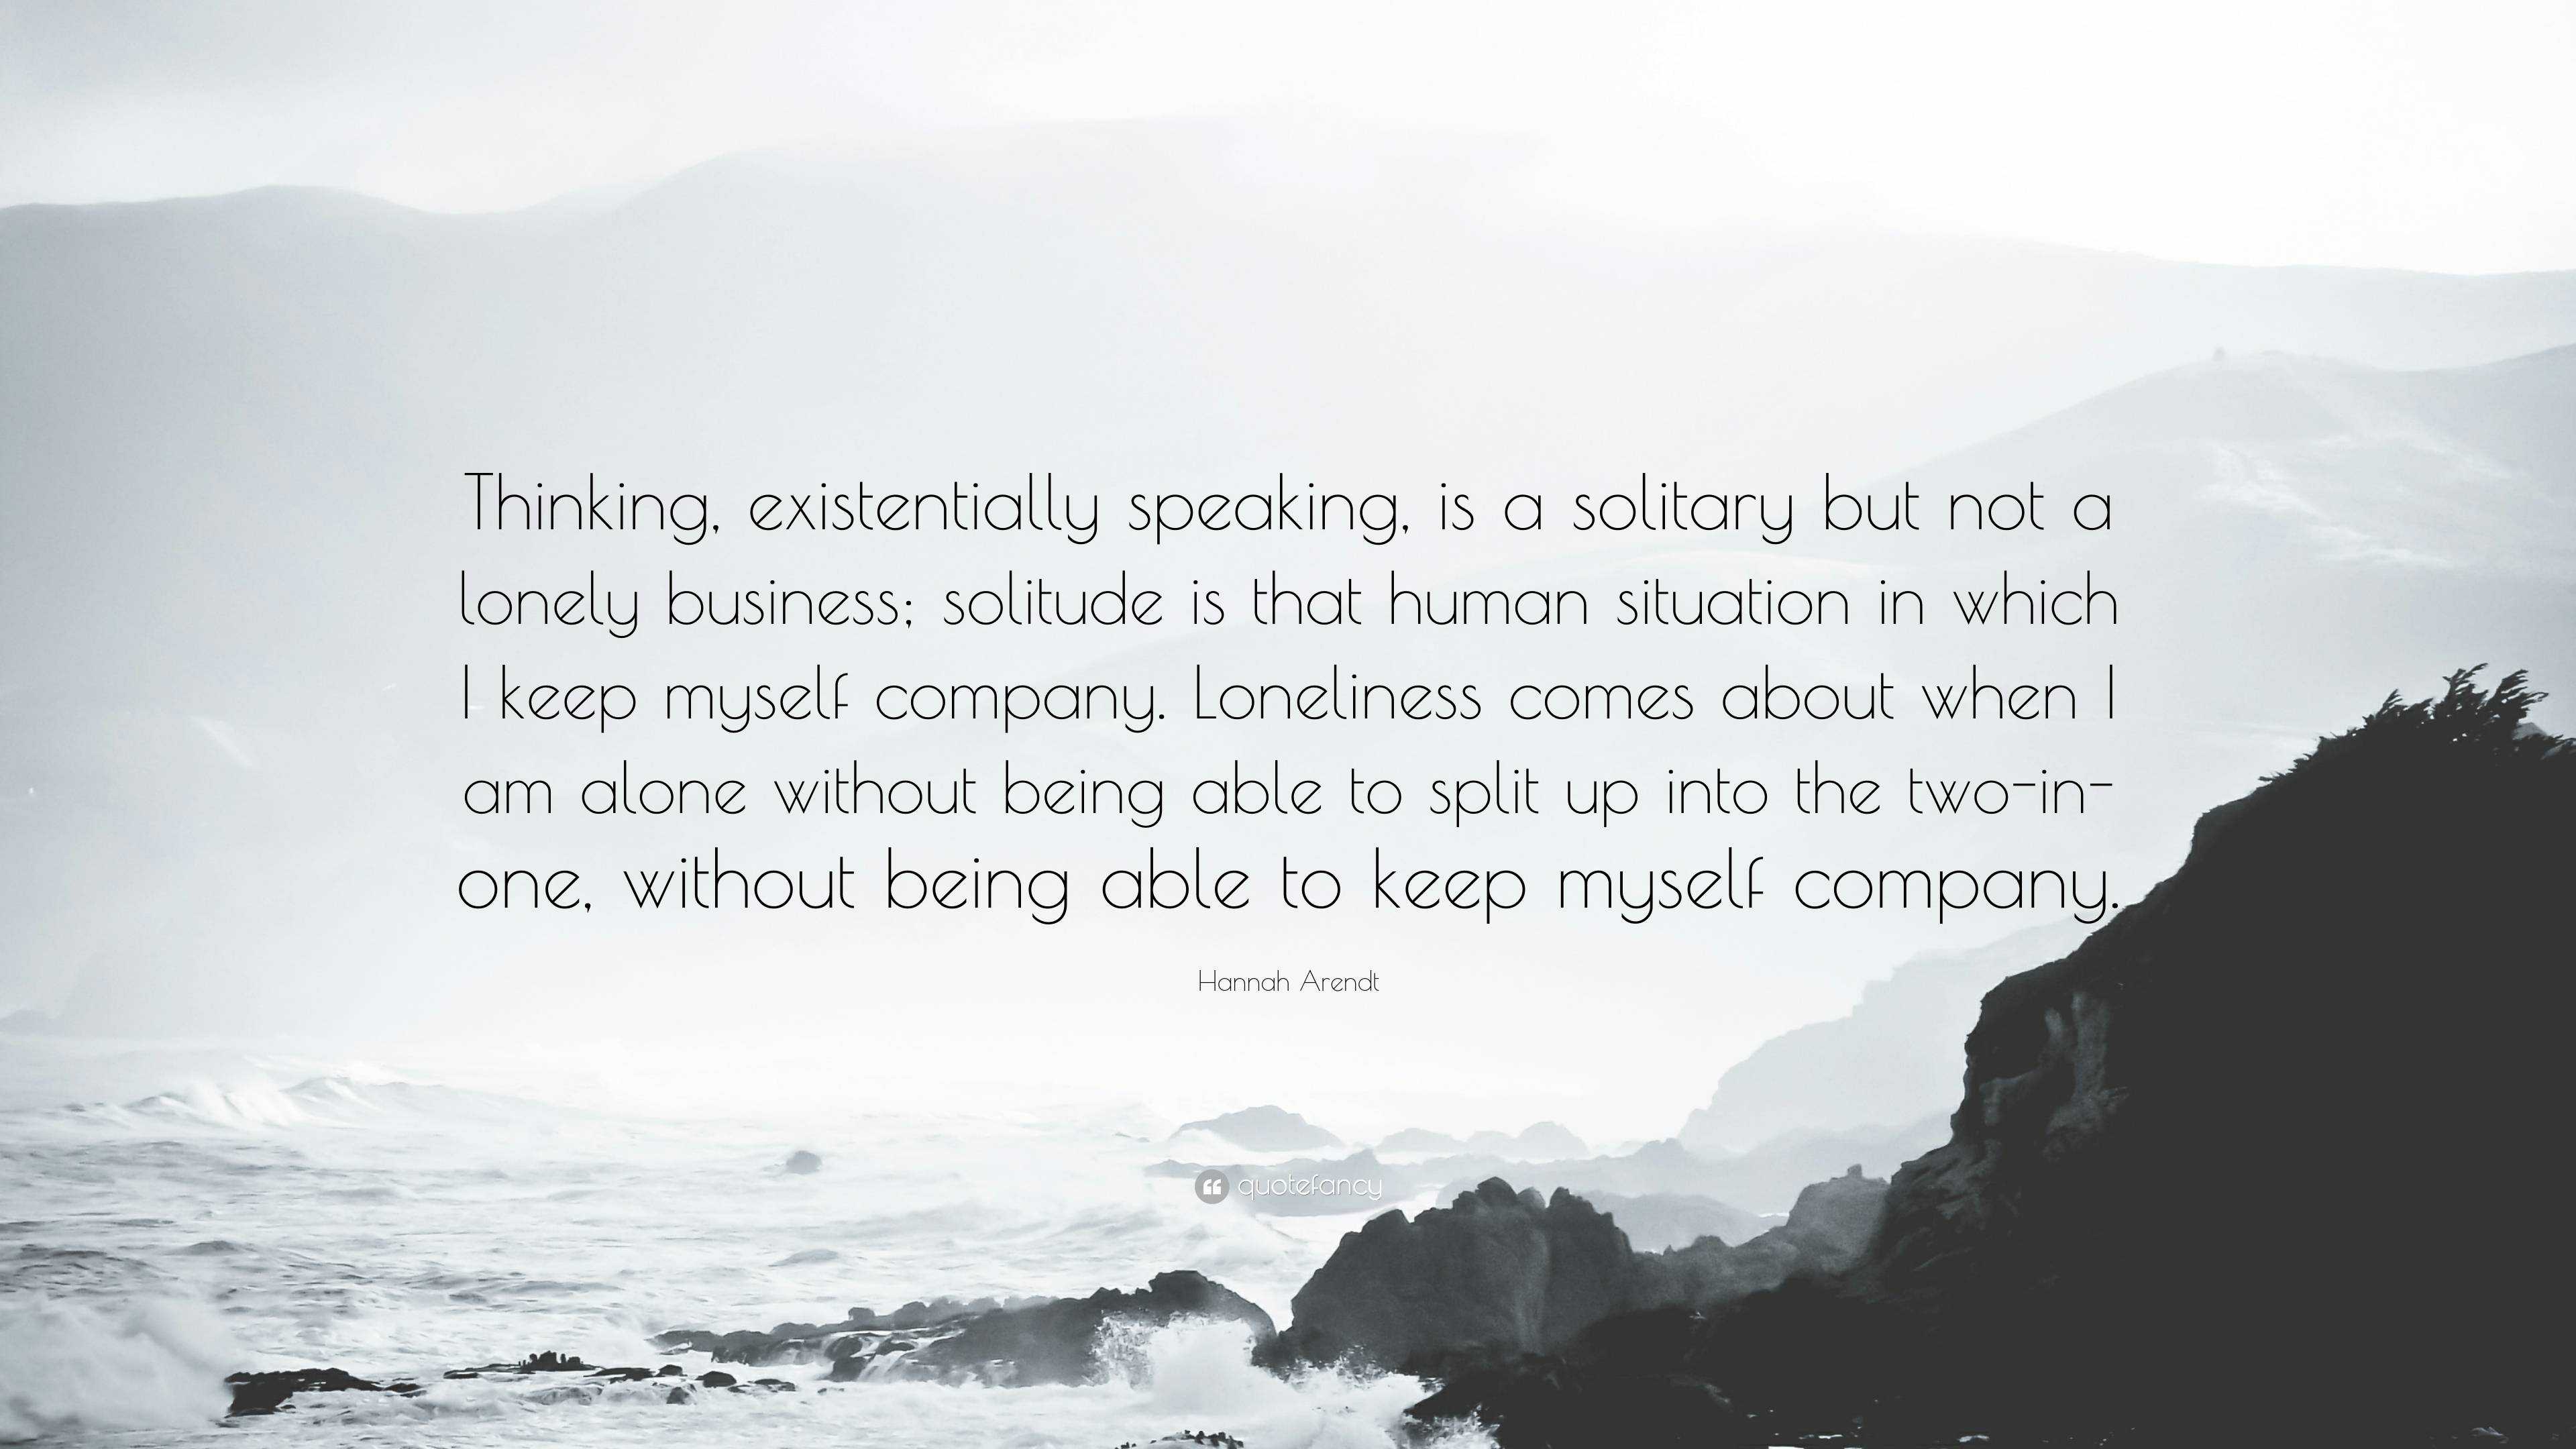 Solitude Vs. Loneliness: How To Be Alone But Not Lonely